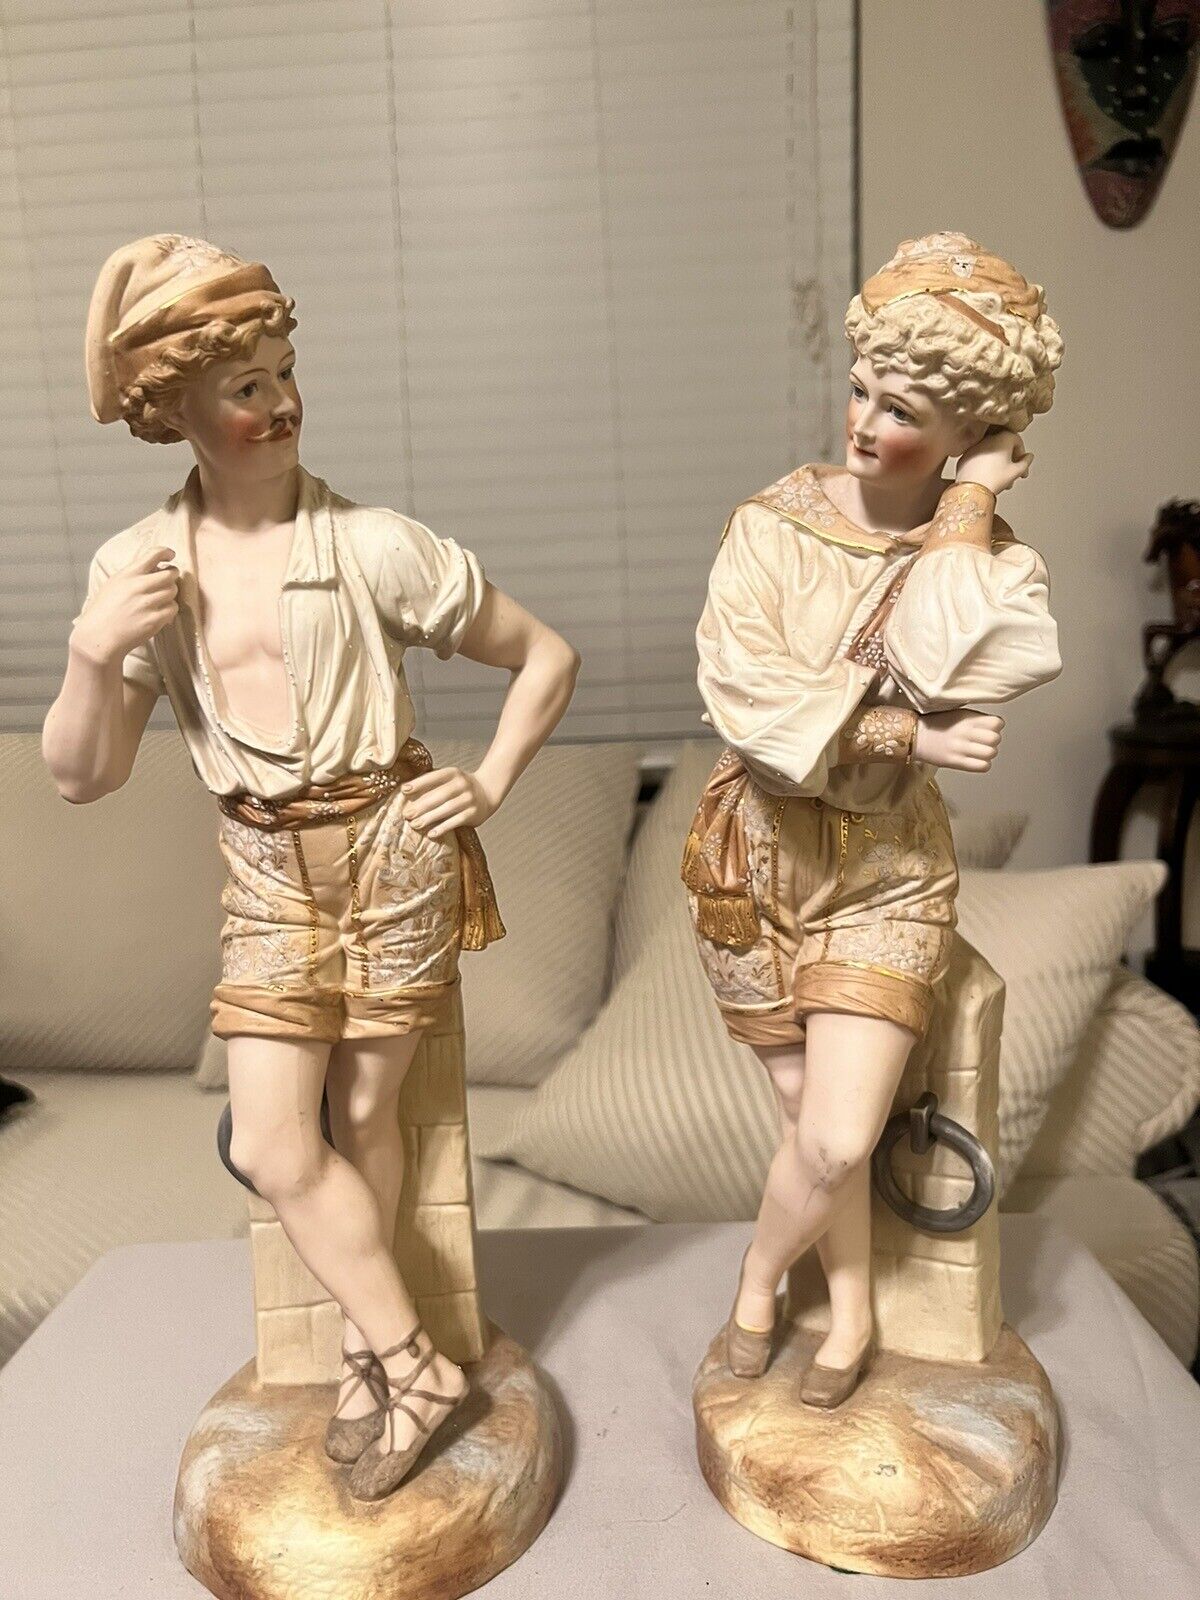 German Scheibe Alsbach Antique Pair Of Bisque Figurines Of Boat People Rare 16”